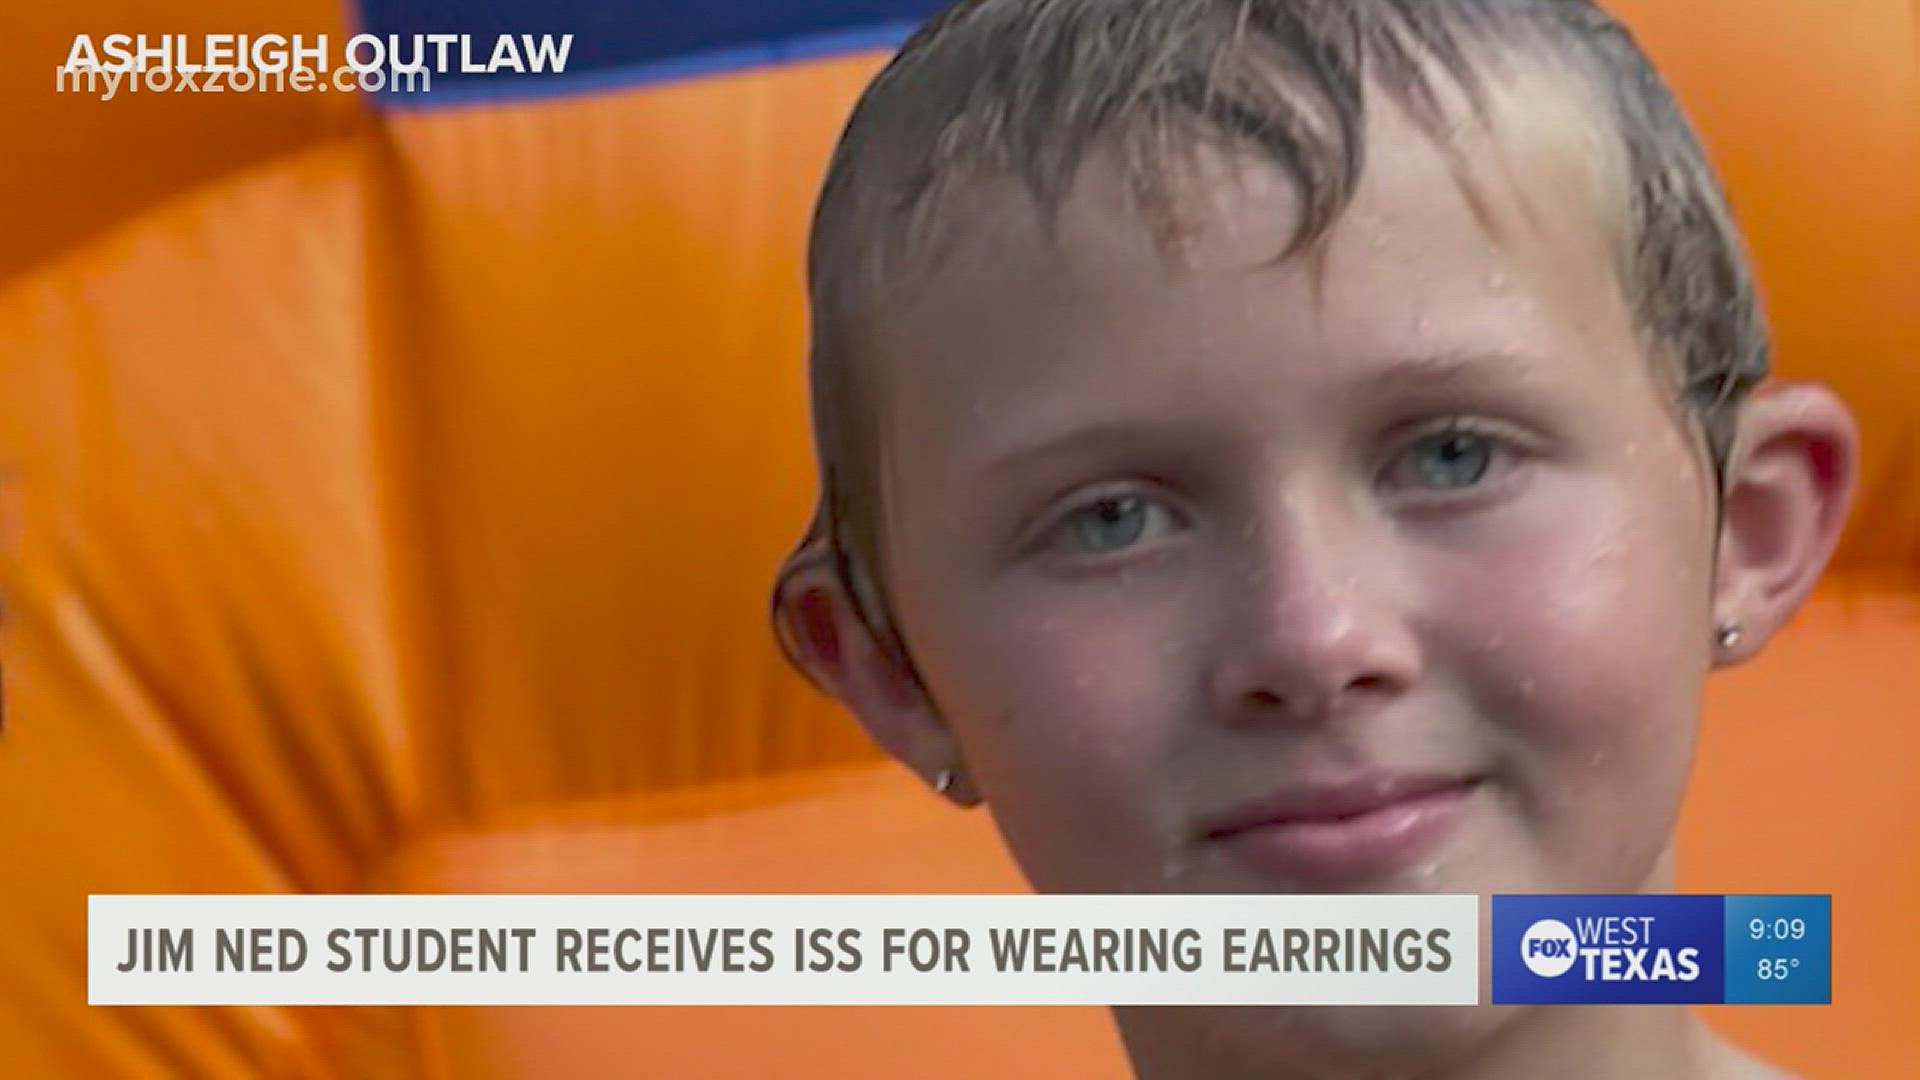 Ryan Outlaw was sent to in-school suspension after he was asked to take out clear spacers in his piercings. His parents are working for a more inclusive dress code.